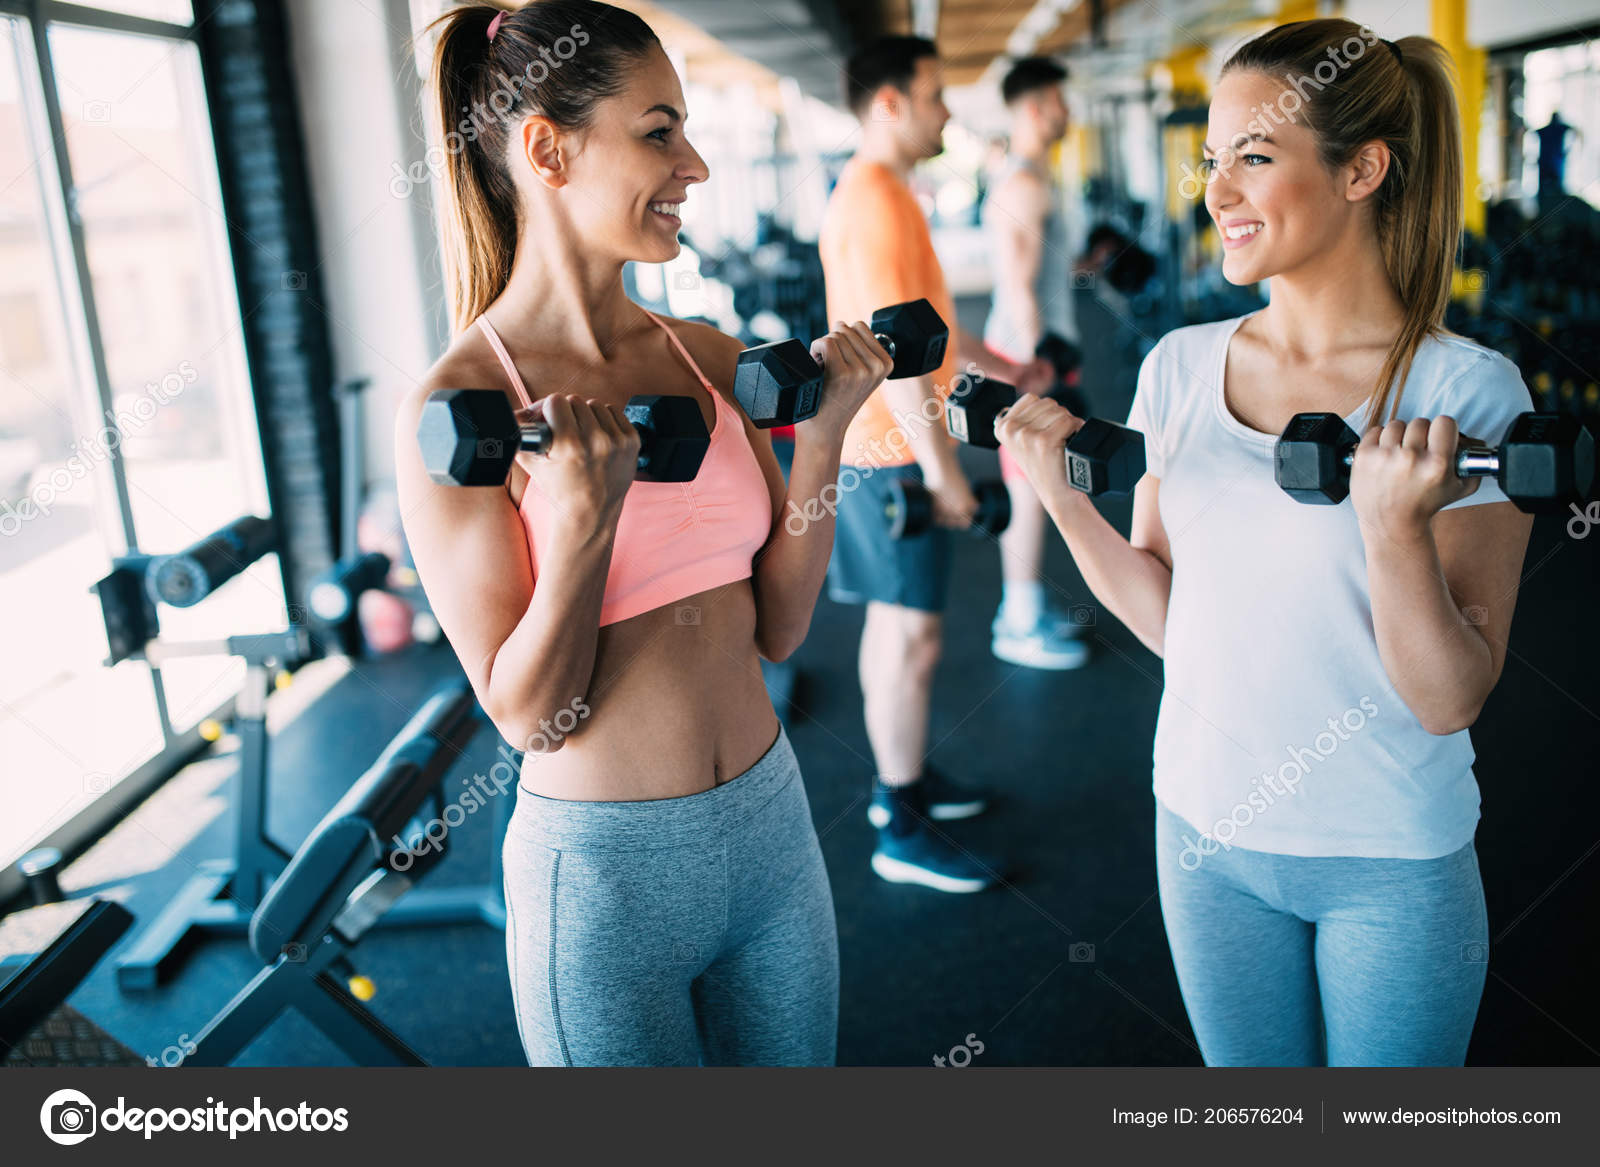 Beautiful fit people working out in gym together Stock Photo by nd3000